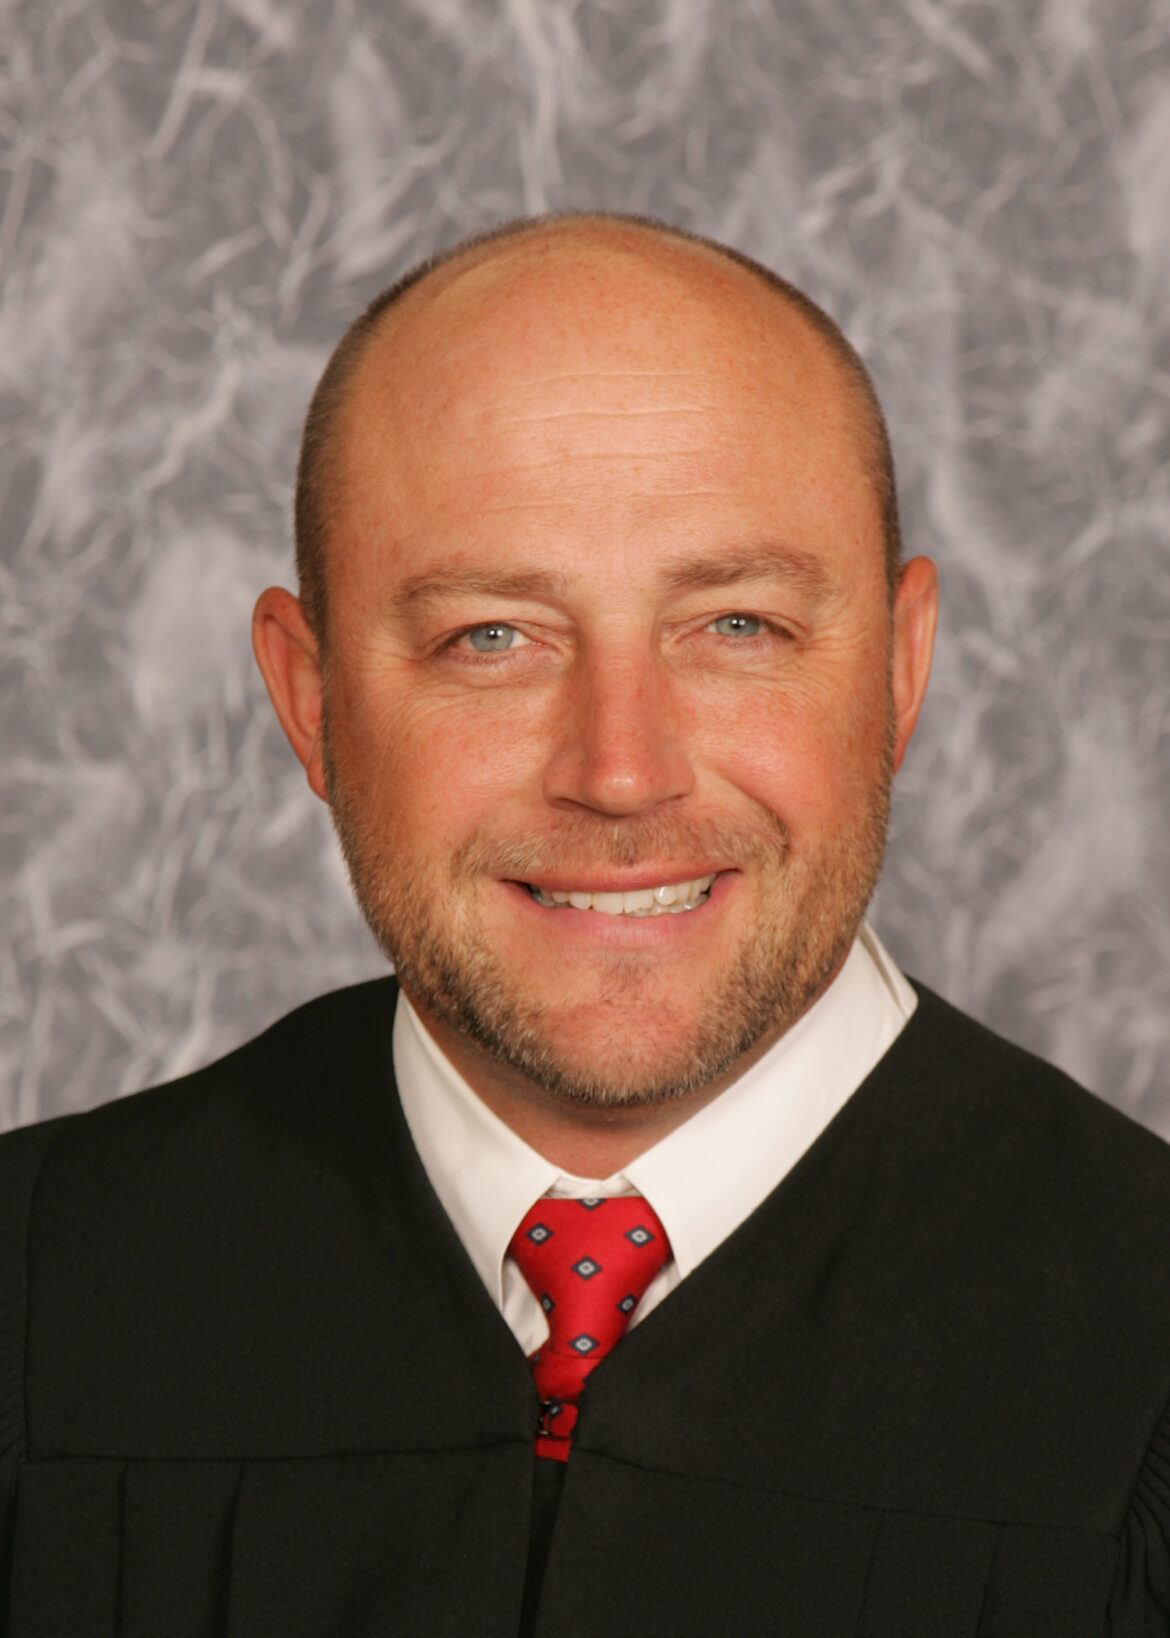 Hendricks County Judge Robert Freese suspended 45 days for misconduct